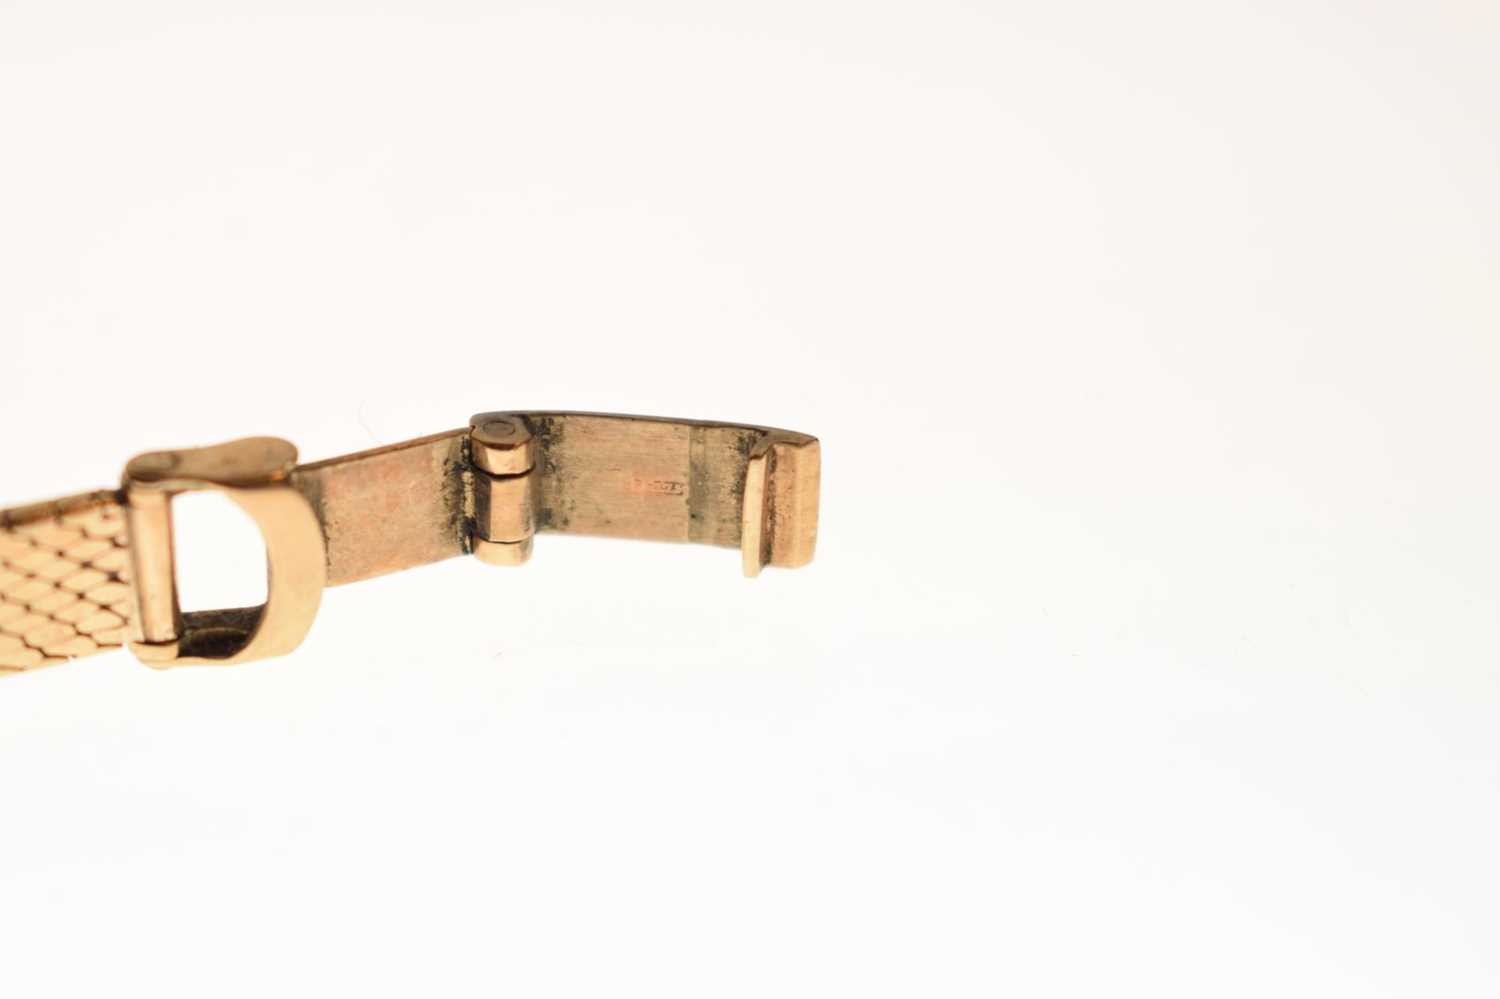 Watches of Switzerland - Lady's 18ct gold cased bracelet watch - Image 6 of 9